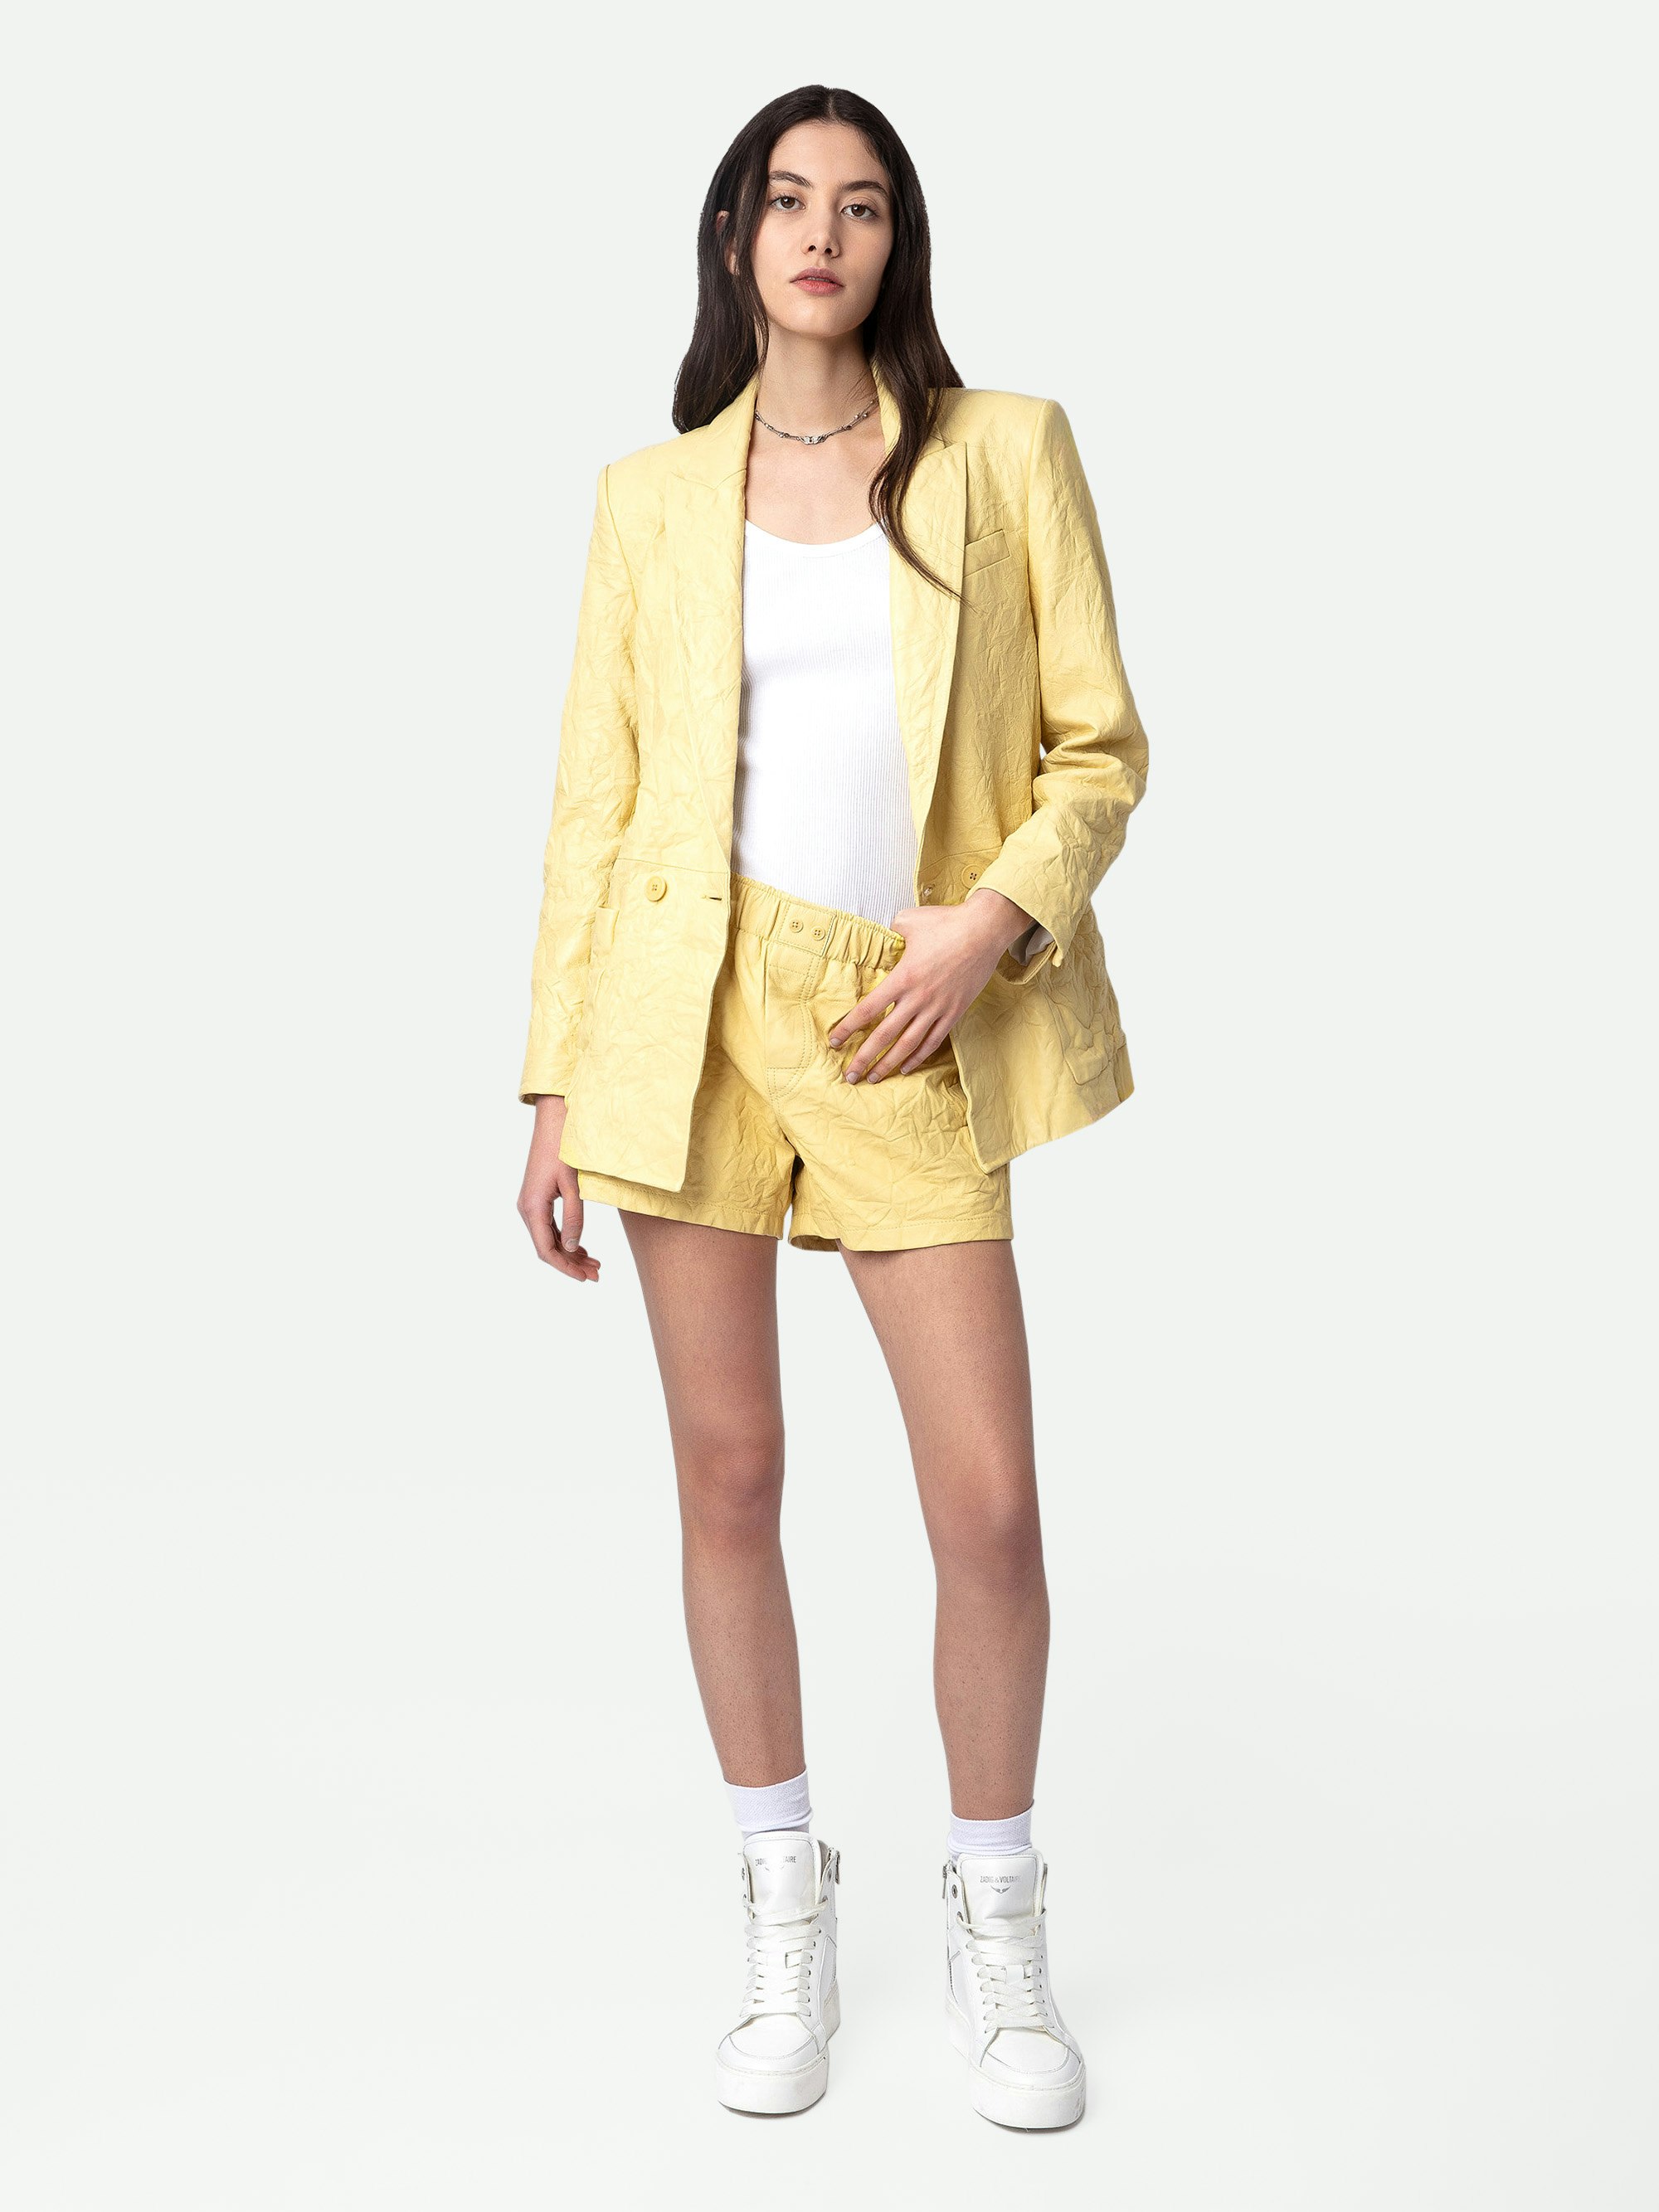 Pax Crinkled Leather Shorts - Women's light yellow crinkled leather shorts.